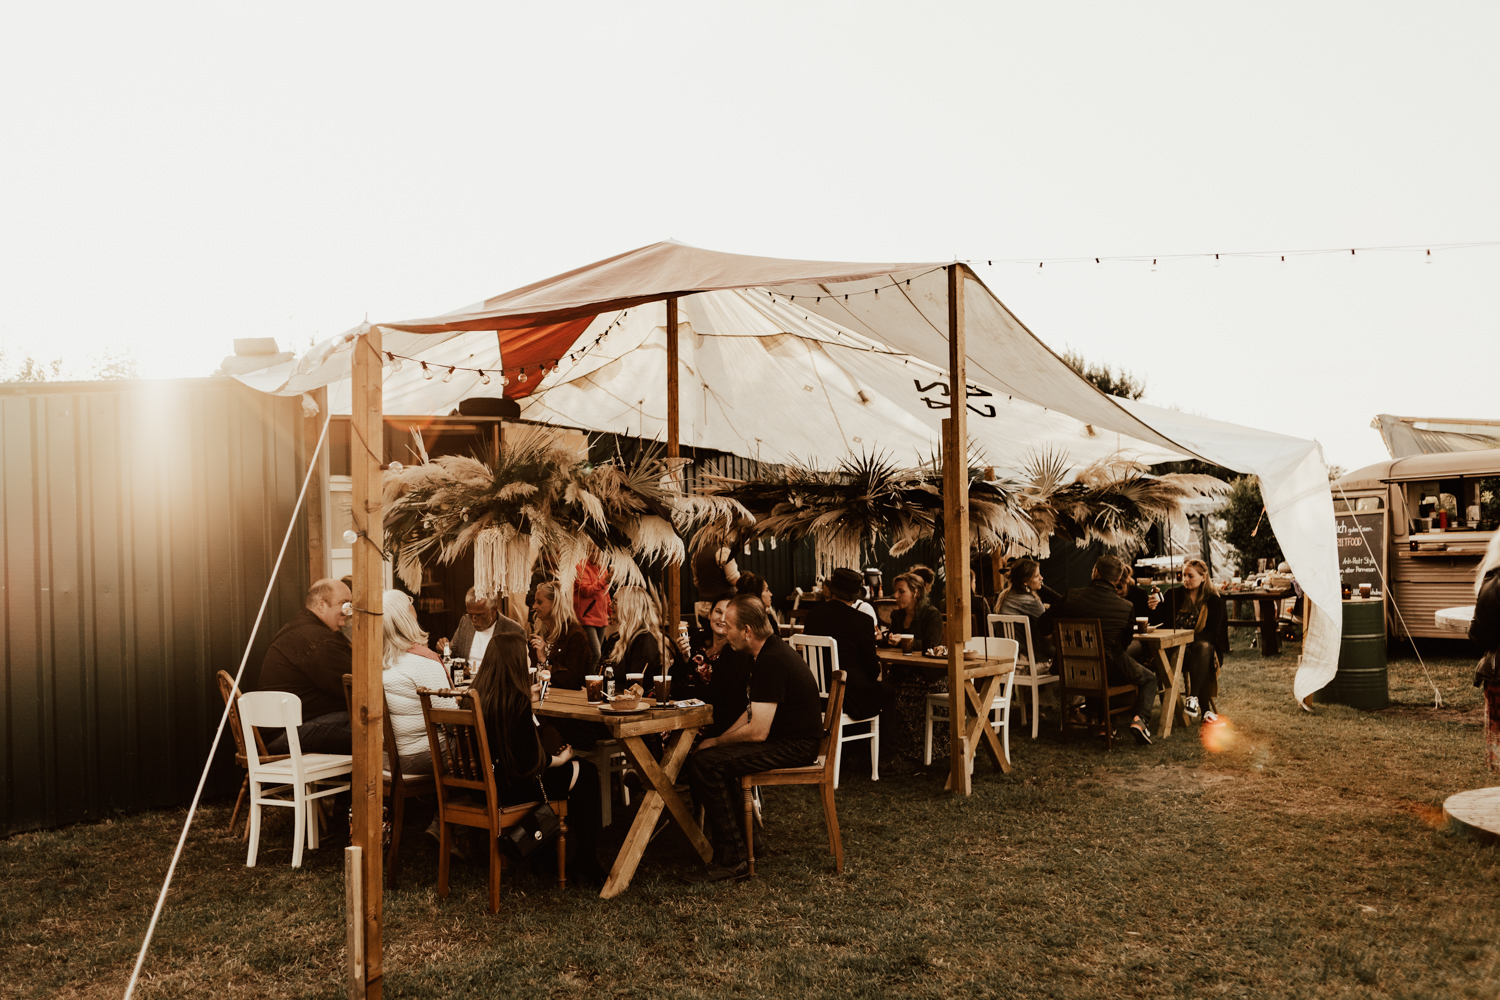 A bohemian festival wedding in Borkum Germany with Harry Potter theme and food truck